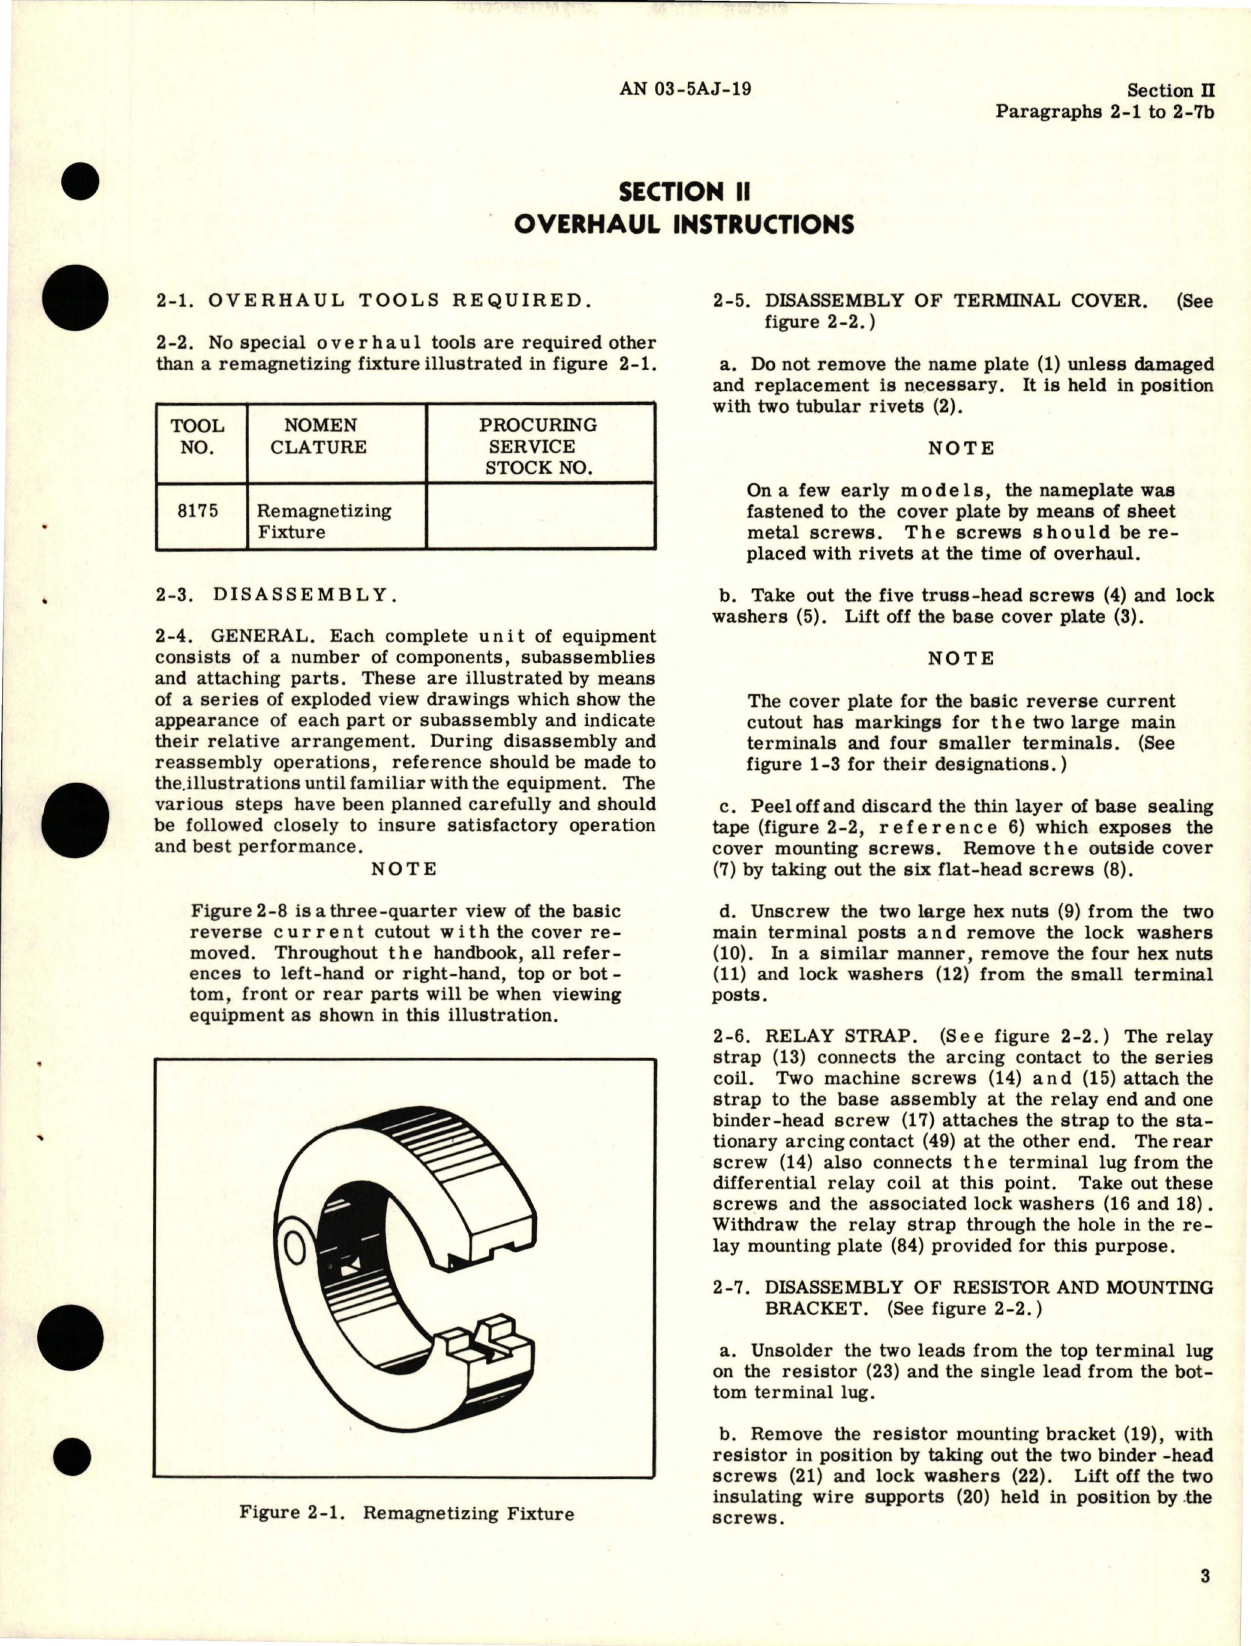 Sample page 7 from AirCorps Library document: Overhaul Instructions for Reverse Current Cutout - Model A-750D, Contractors - Models A-751D and A-751E